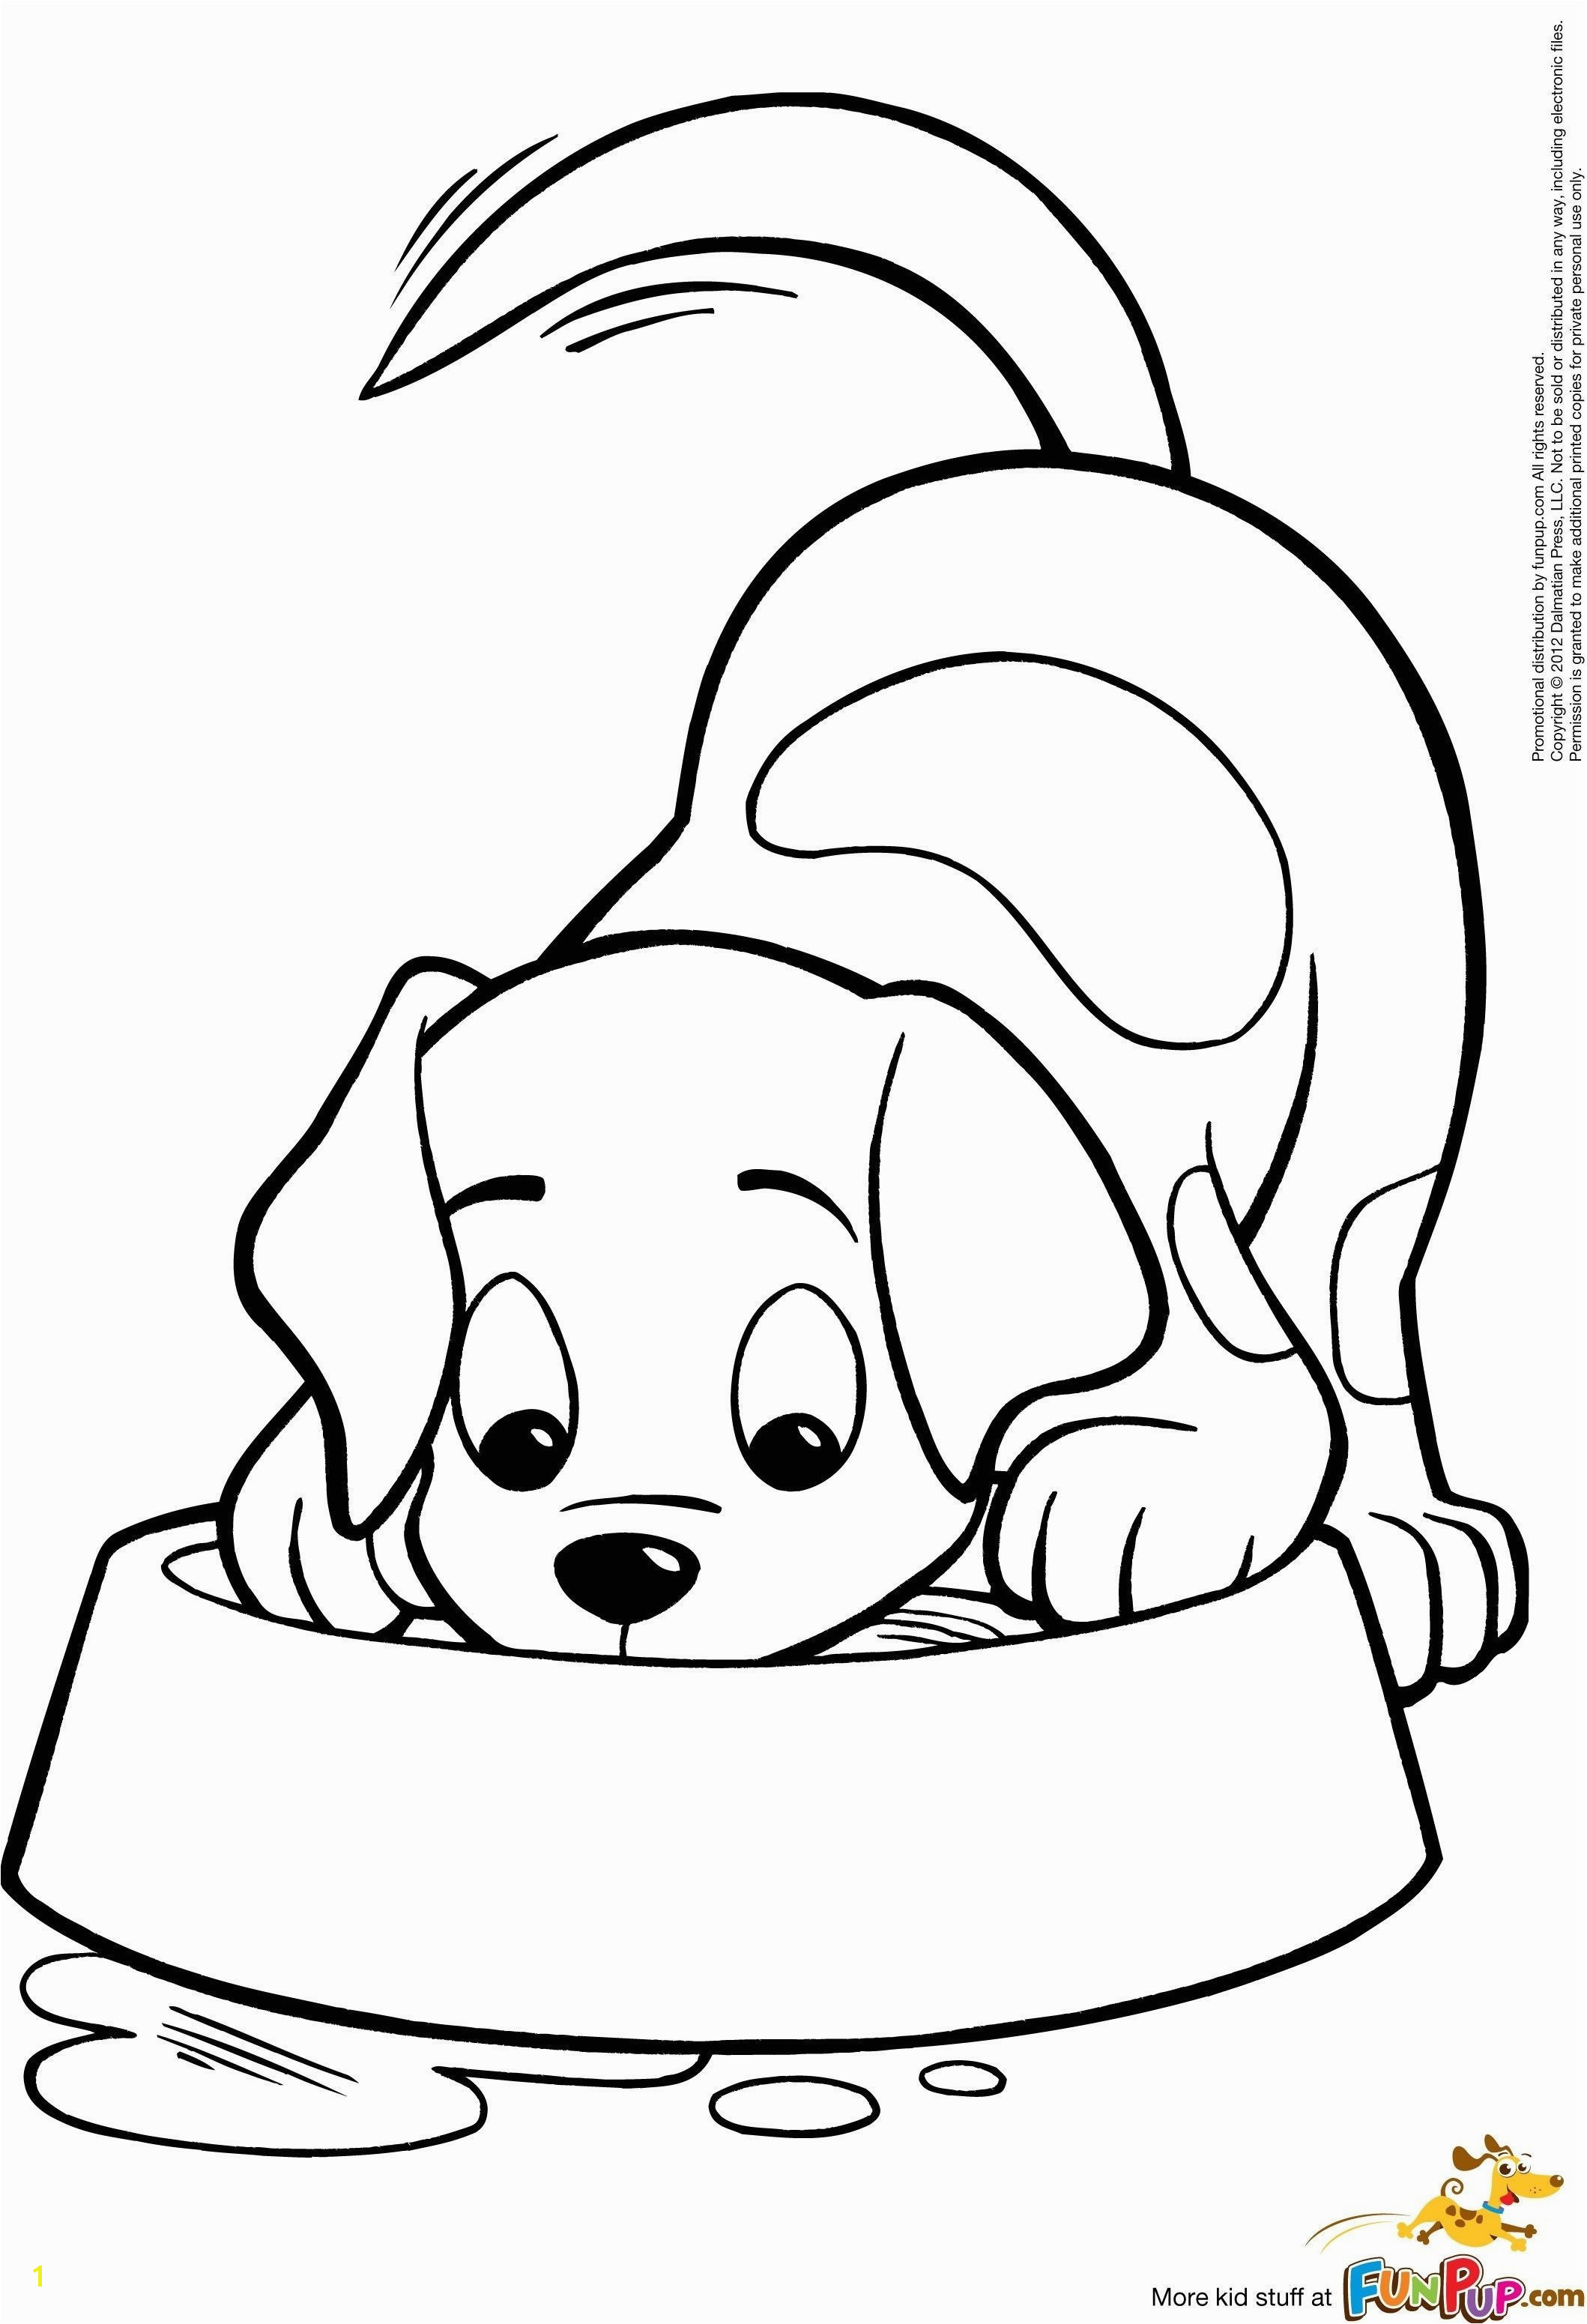 Dalmatian Coloring Pages Lovely Dog Coloring Pages Valid Puppy Coloring Pages Lovely Printable Od Dalmatian